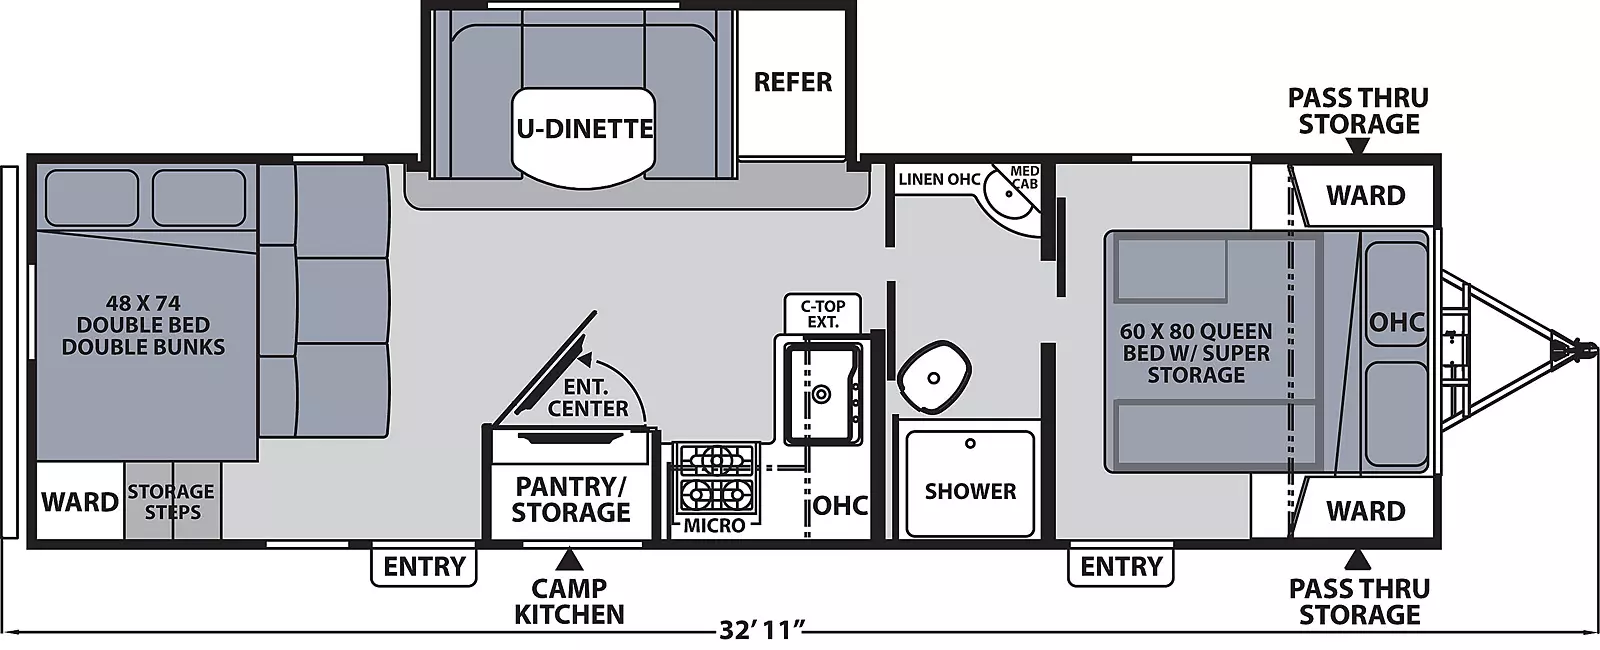 The 266BHS has one slide out on the off-door side and two entry doors on the door side. Interior layout from front to back: front bedroom with foot facing queen bed, super storage under bed, overhead cabinet, and wardrobes on either side of the bed; pass through bathroom; kitchen living dining area with off-door side slide out containing refrigerator and u-shaped dinette; door side kitchen containing countertop extension, sink, overhead cabinet, cook top stove, and microwave overhead; door side entertainment center with pantry/storage behind it. Sofa in front of double bed over double bed bunks, next to wardrobe and storage at the rear.